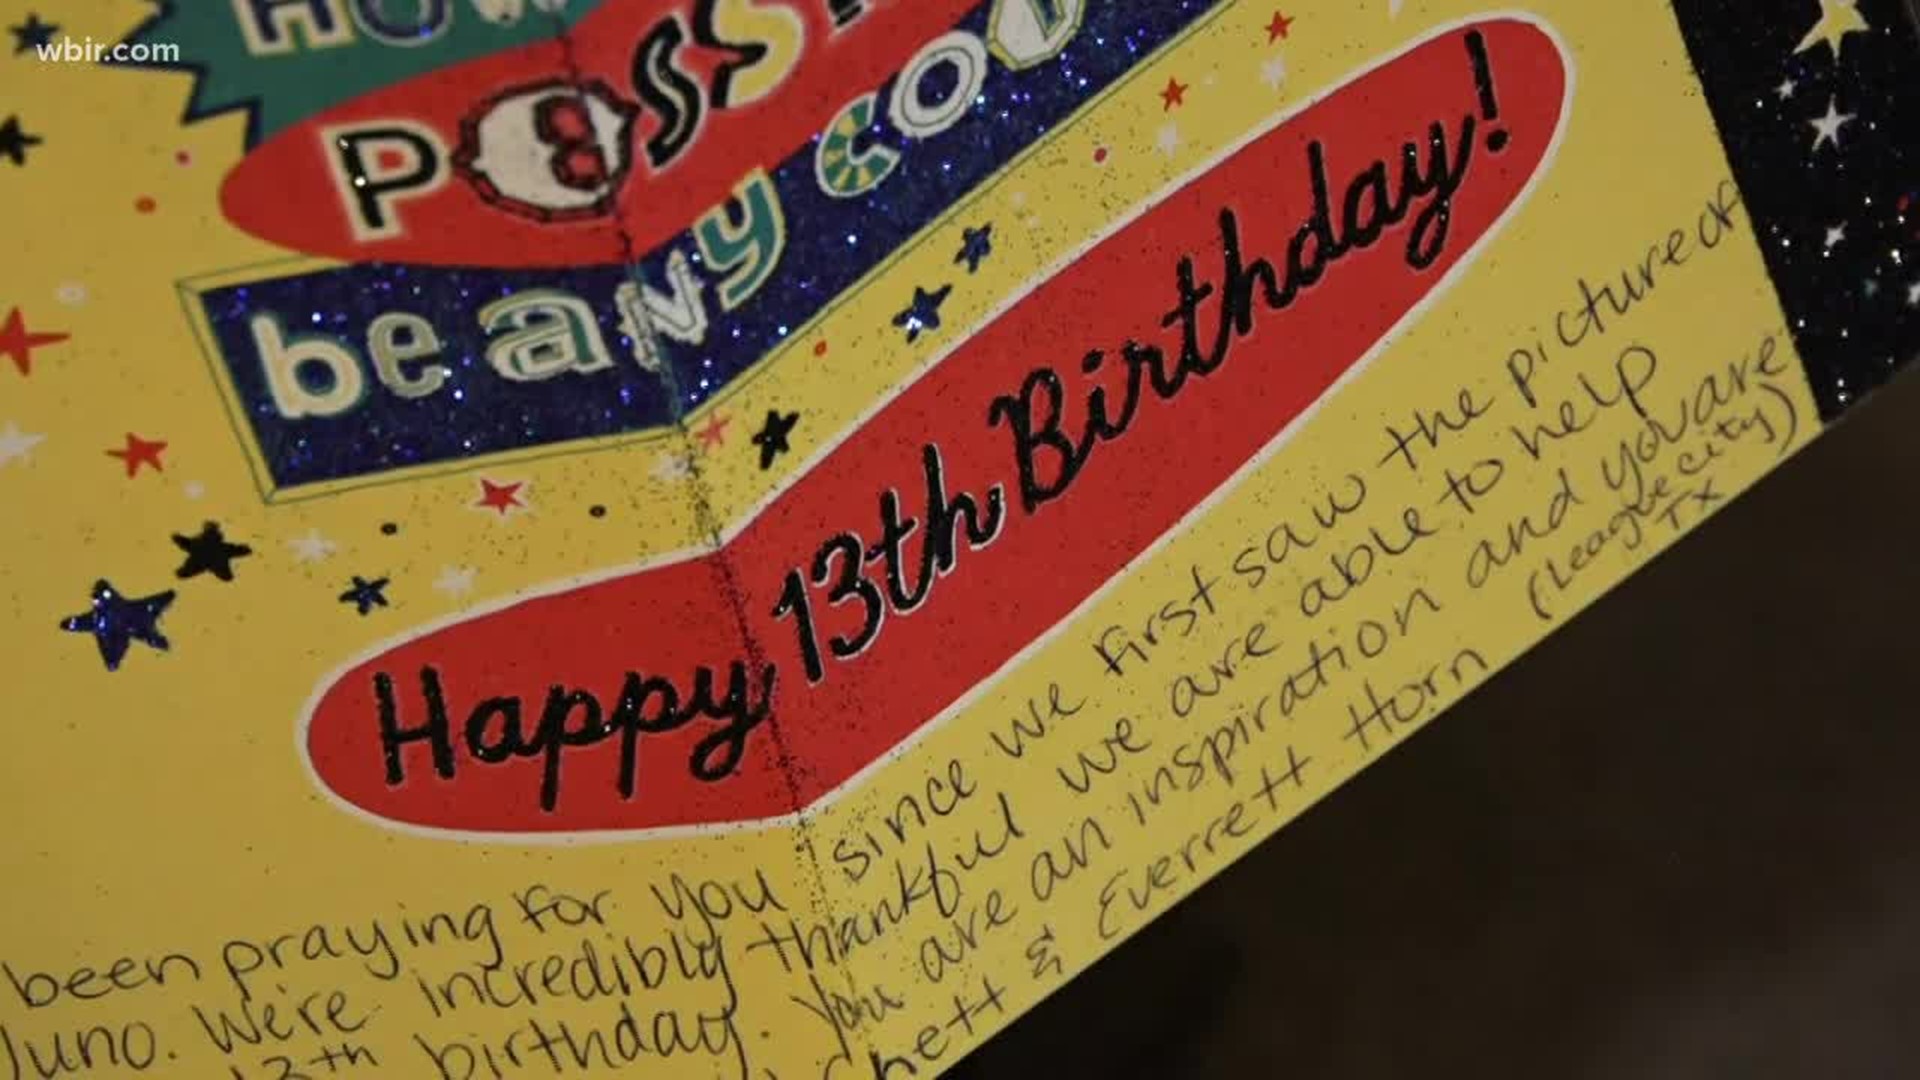 Birthday cards wanted for terminally ill boy in Blount County - Courtesy WBIR